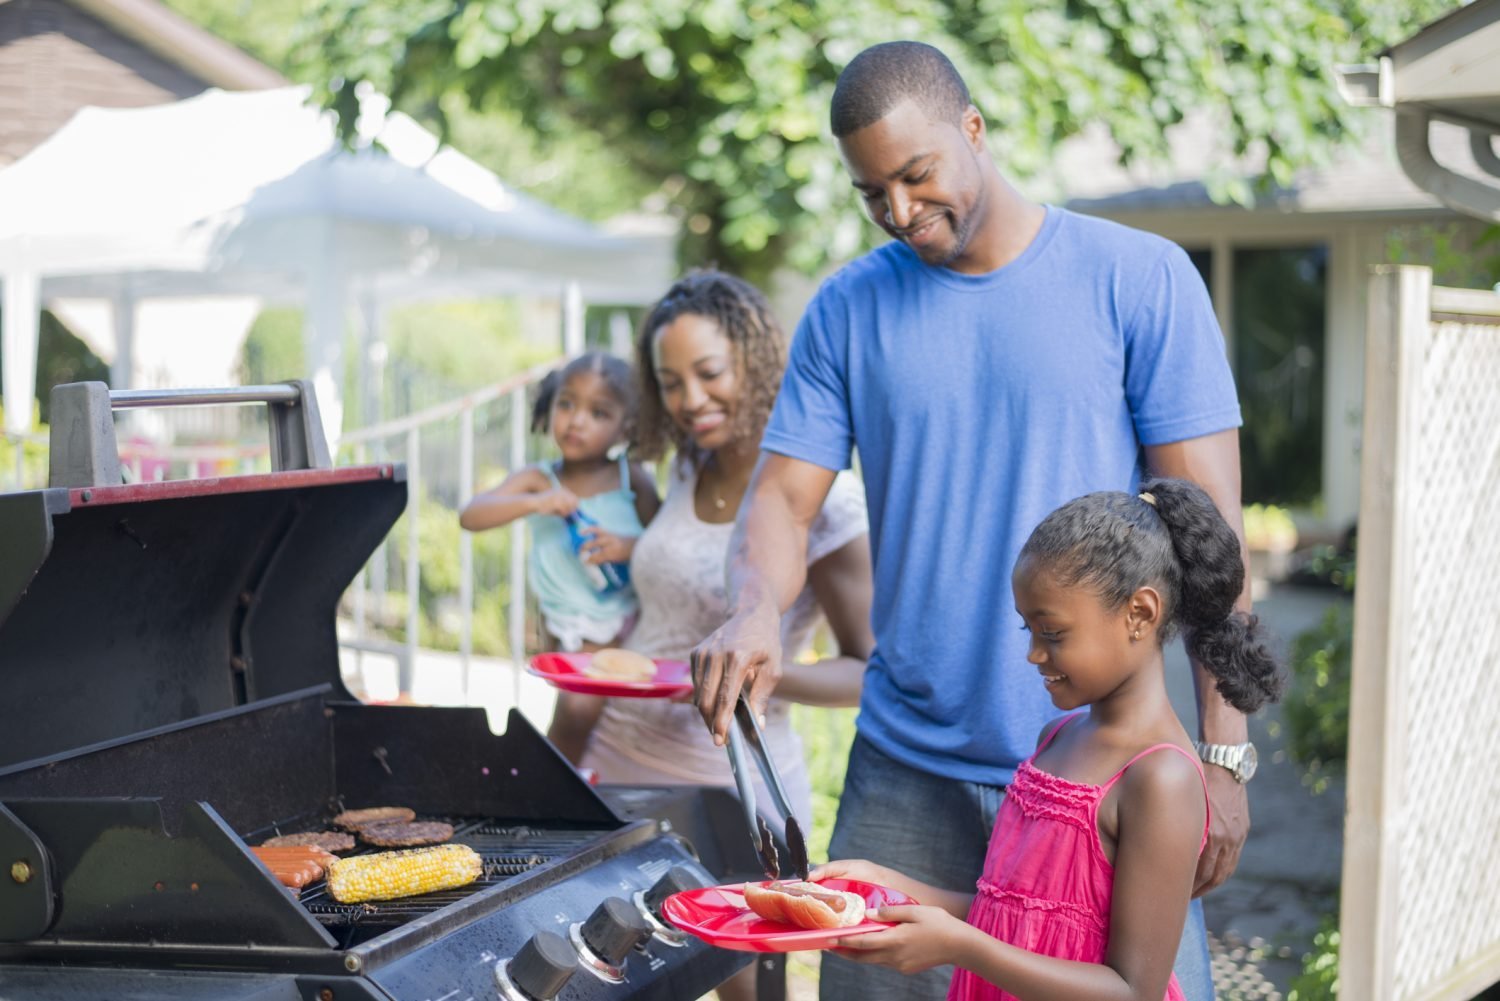 All the recipes & activities you need for your Memorial Day BBQ